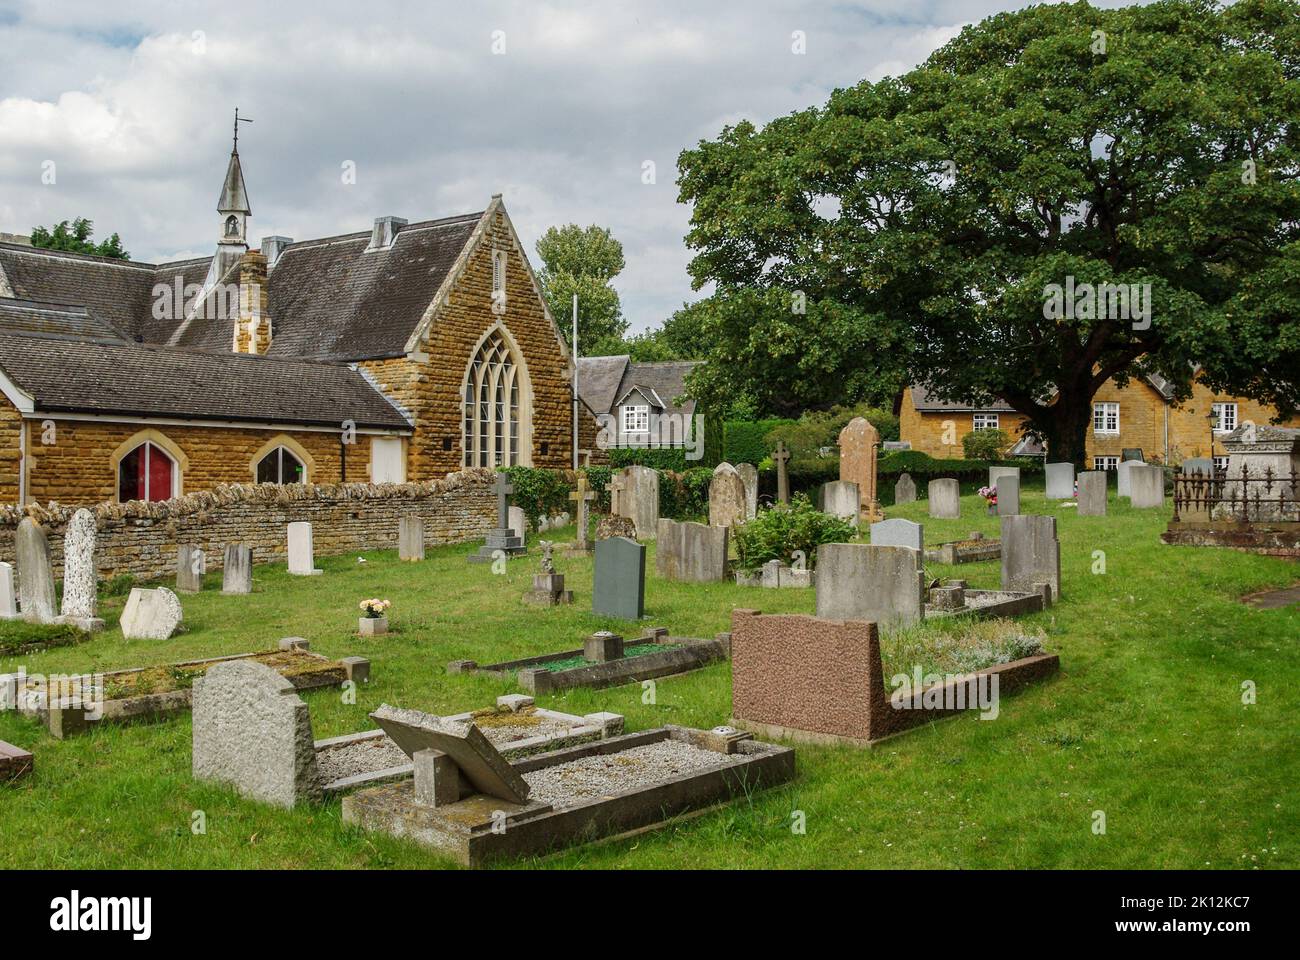 A view of the churchyard of St Peter and St Paul in the village of Sywell, Northamptonshire, UK; the Village Hall in the background Stock Photo